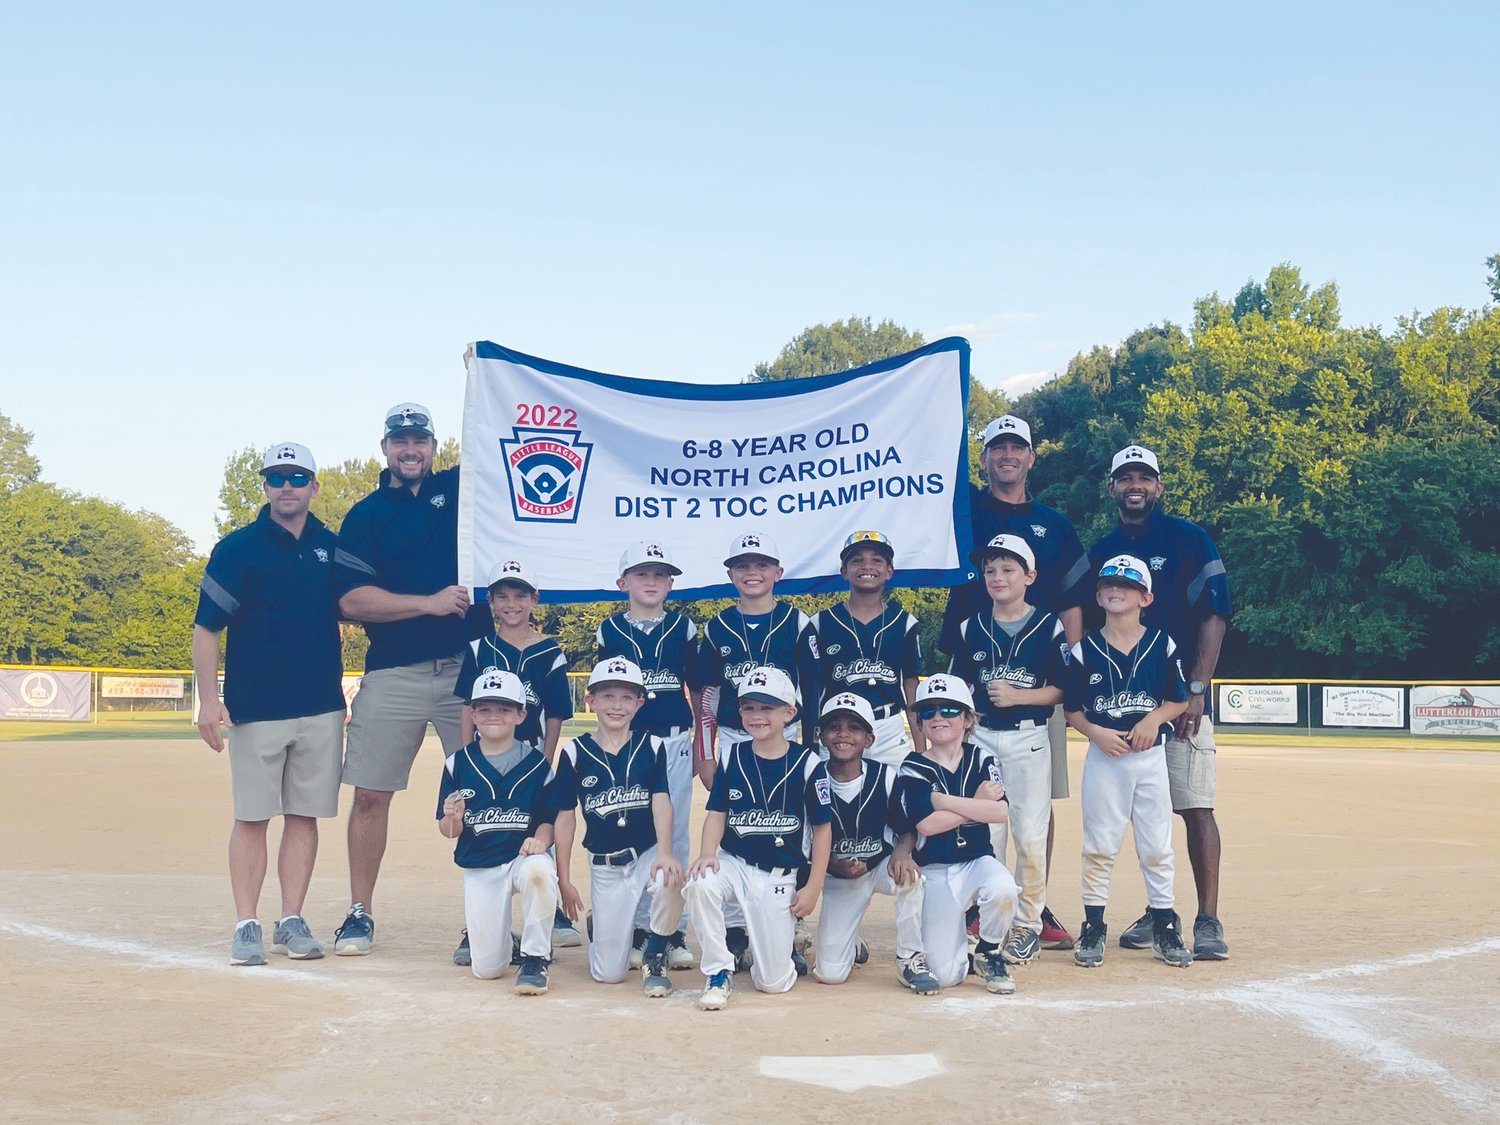 The East Chatham 8U All-Stars pose with the banner after winning the N.C. Little League District 2 title in Pittsboro. East Chatham will head to Wilson in early July for the state tournament, along with its 9U All-Stars team.